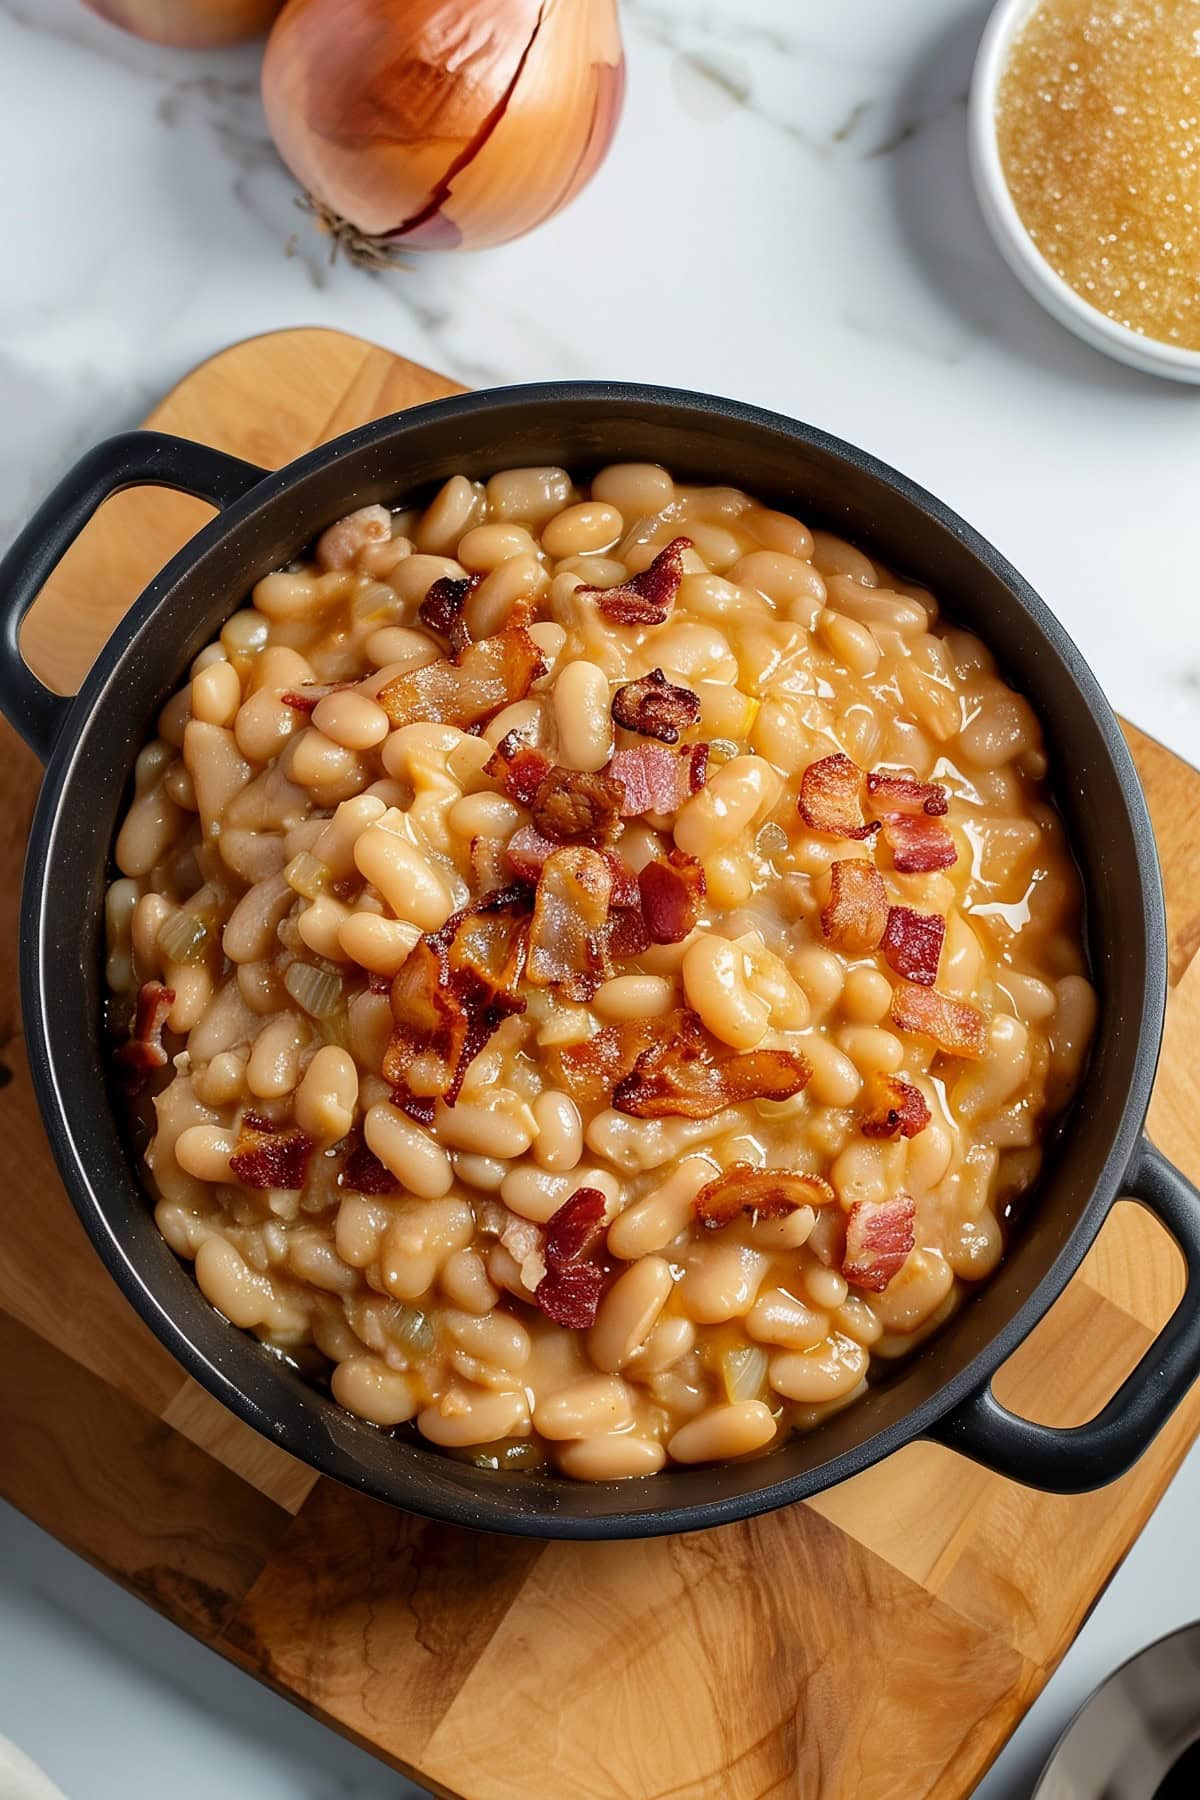 Top View of Grandma Brown's Baked Beans with Bacon in a Cast Iron Pan on a Wooden Cutting Board with Onions and Sugar Around the Pan